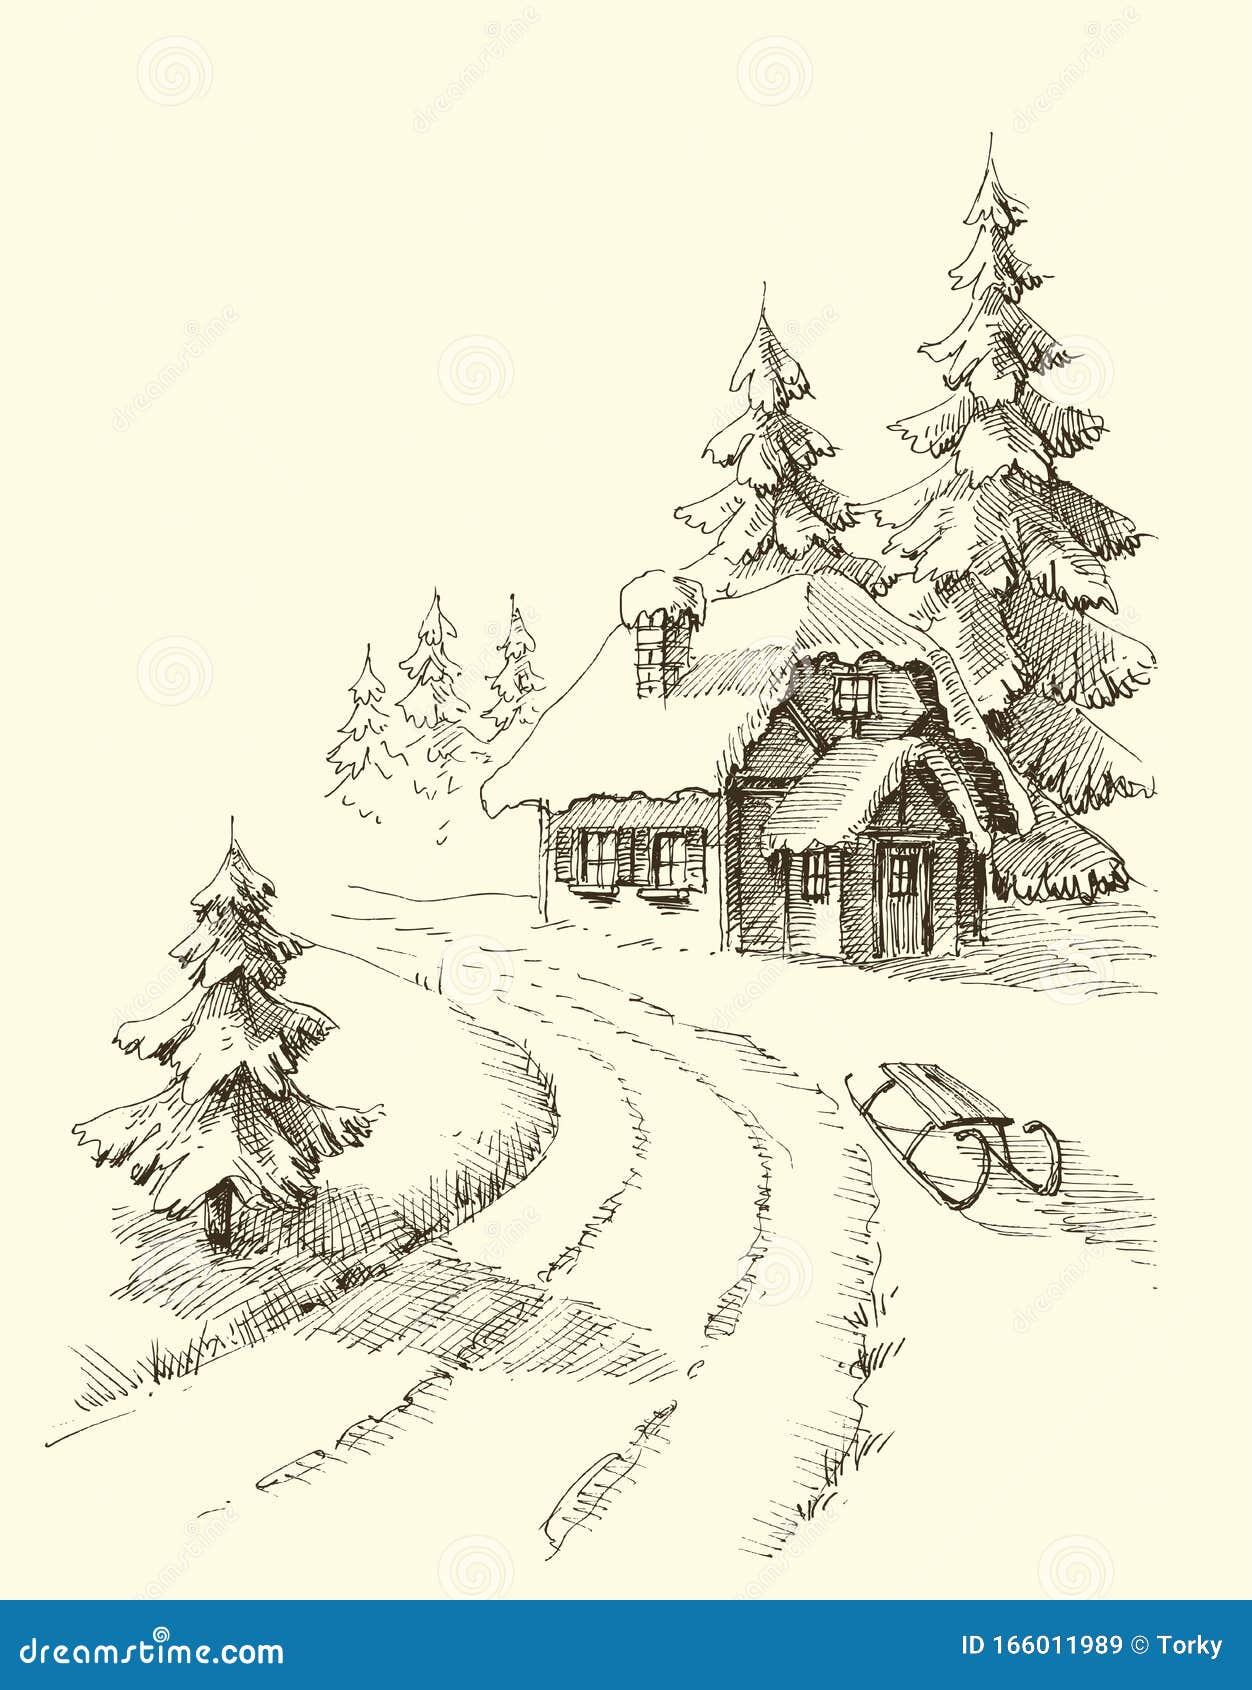 How to draw Snowfall Scenery step by step Winter Season scenery drawing   Drawings Amazing drawings Scenery